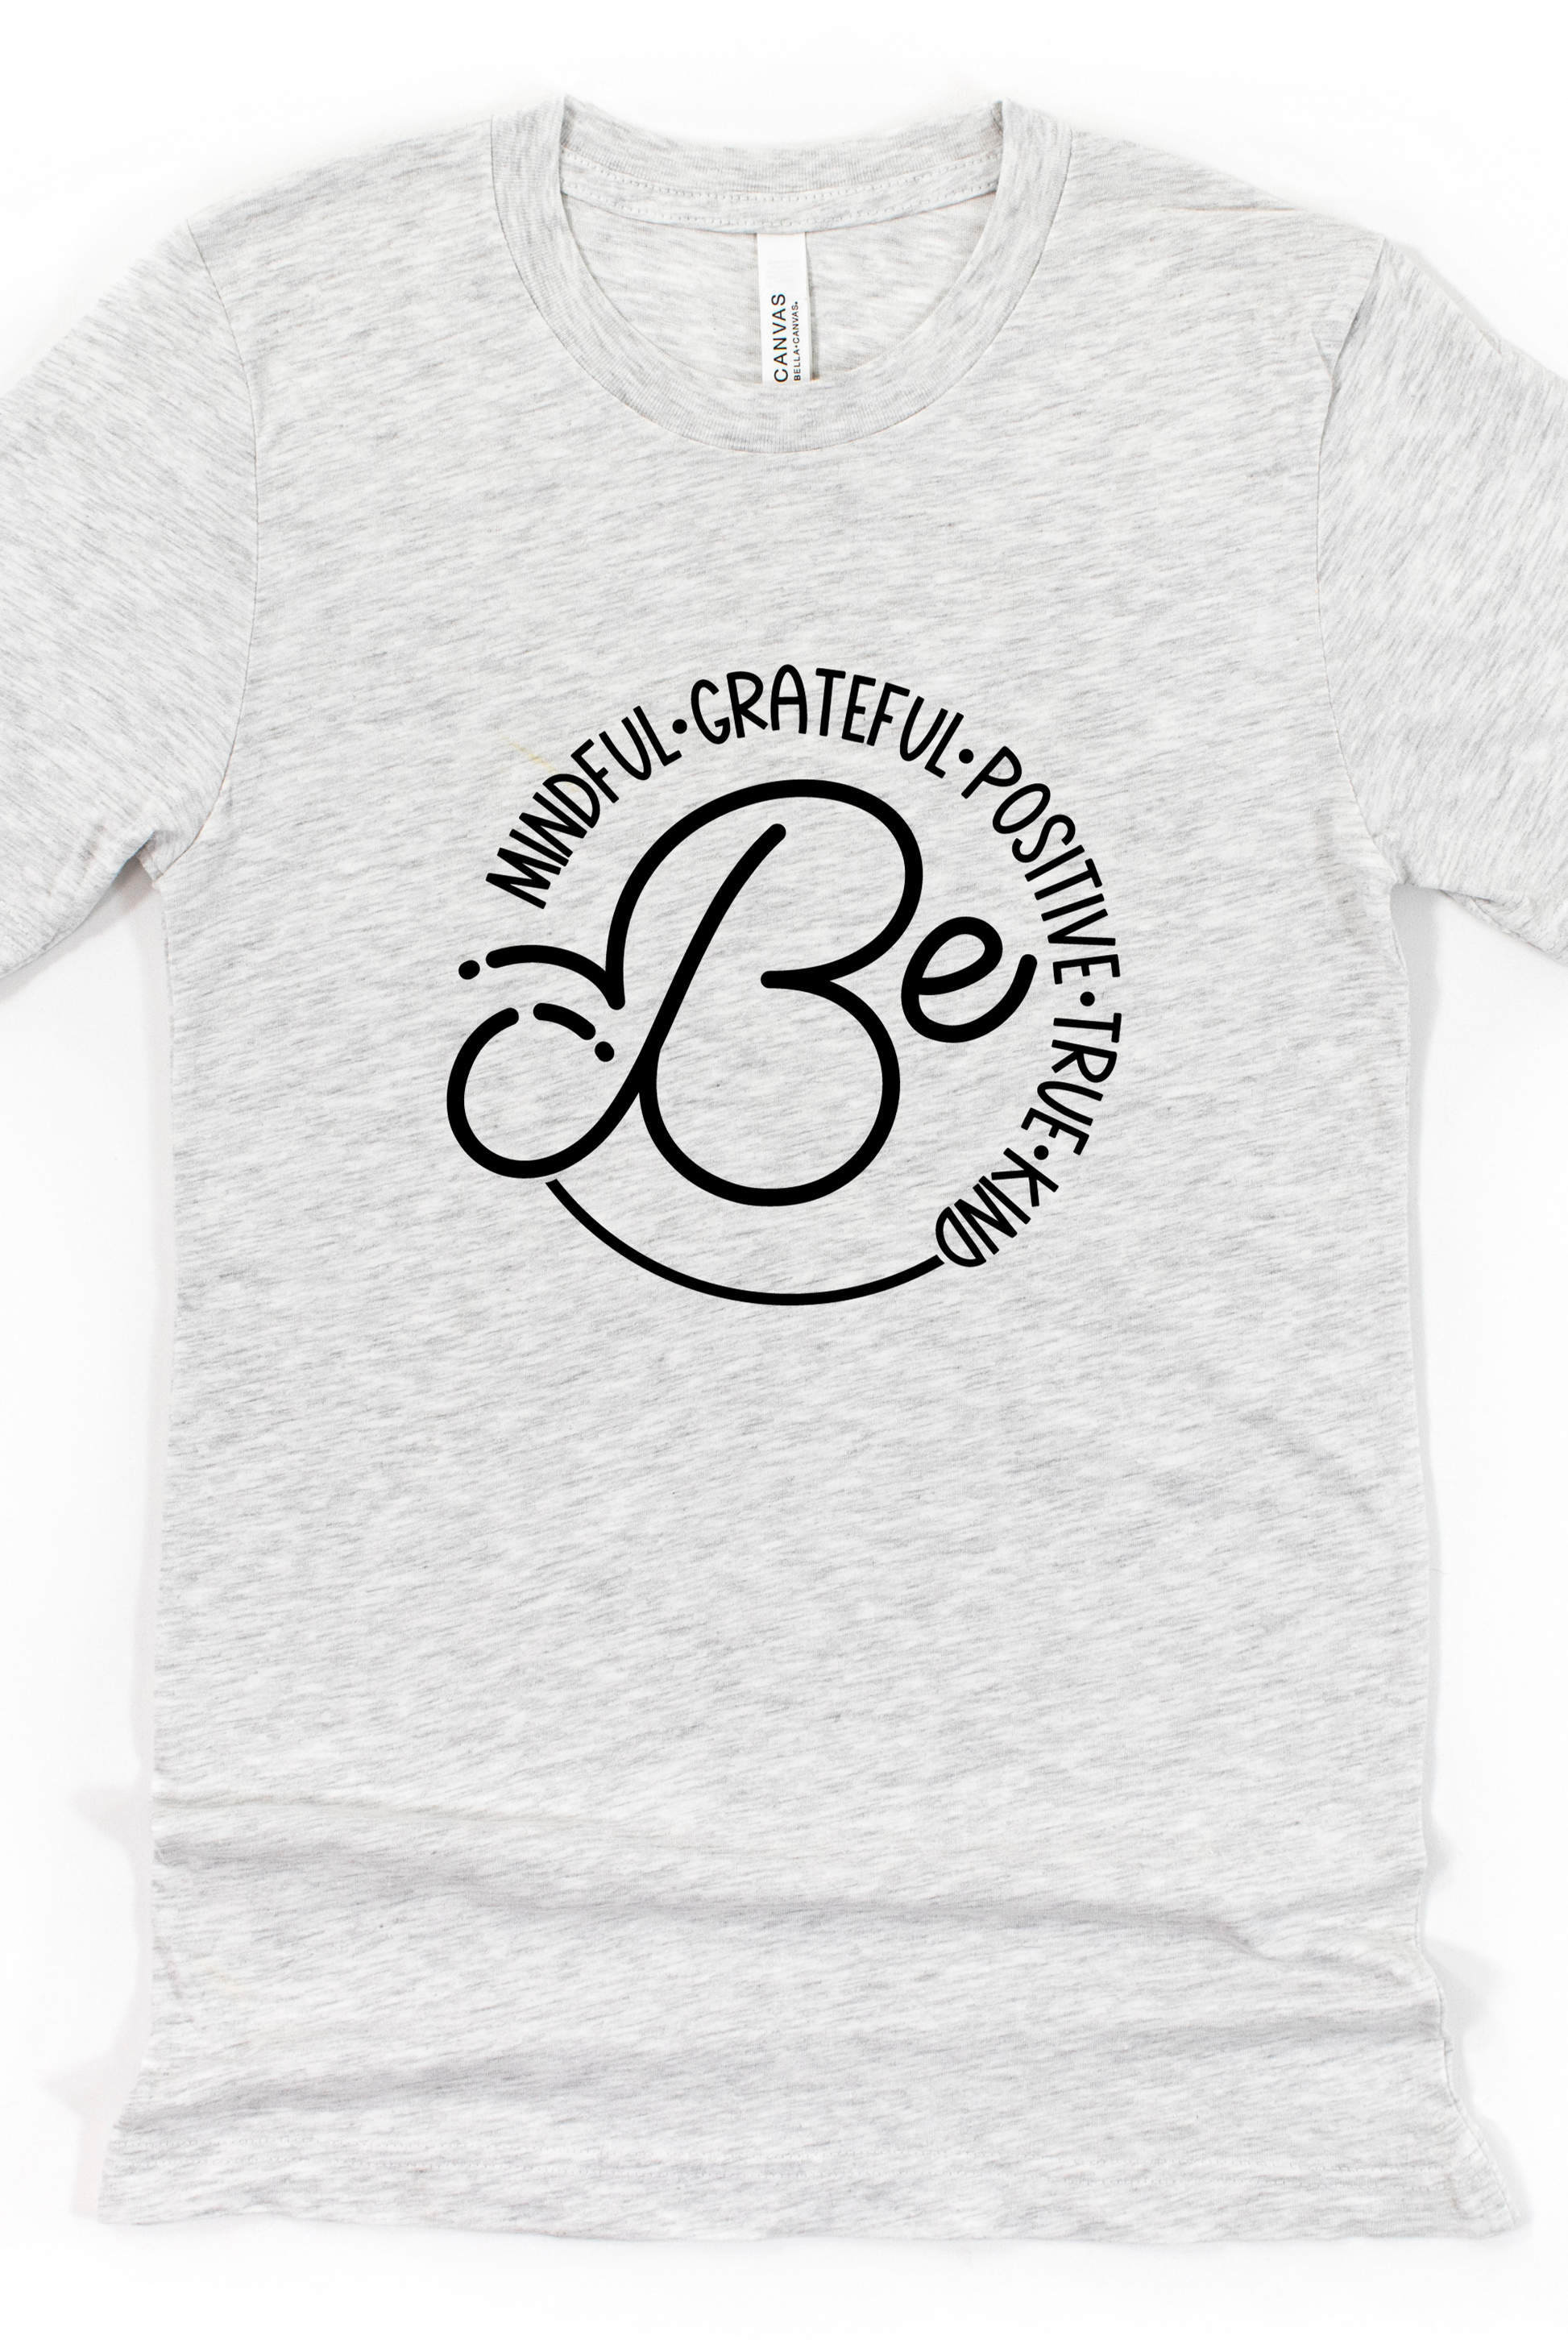 Be Kind Positive Tee Graphic Top - The Magnolia Cottage Boutique